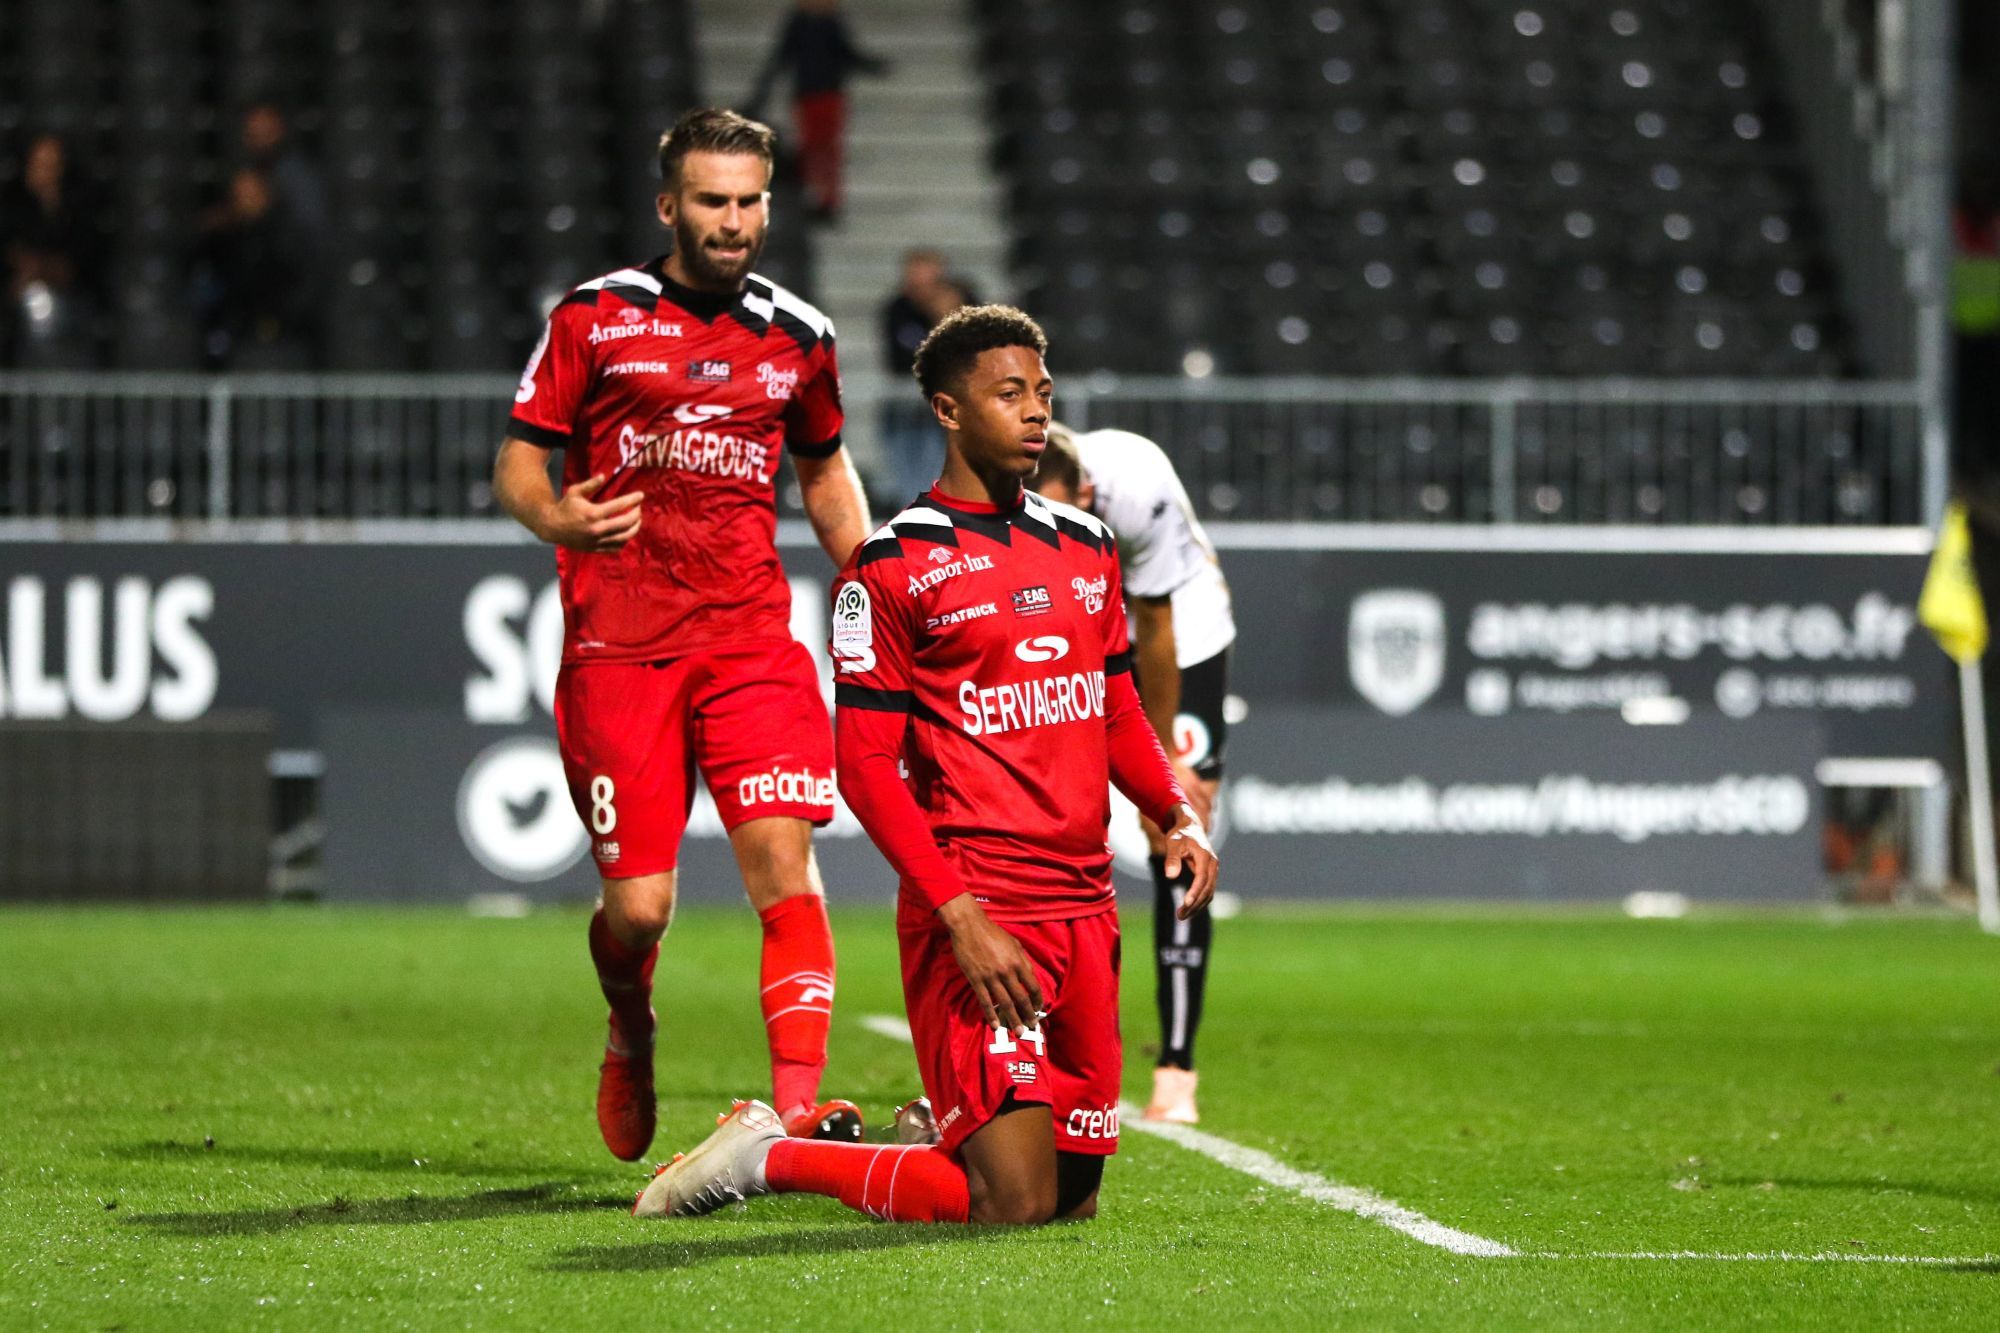 Nathael Julan of Guingamp looks dejected after not scoring a goal during the Ligue 1 match between Angers and Guingamp at Stade Jean Bouin on September 29, 2018 in Angers, France. (Photo by Eddy Lemaistre/Icon Sport) -  (France)